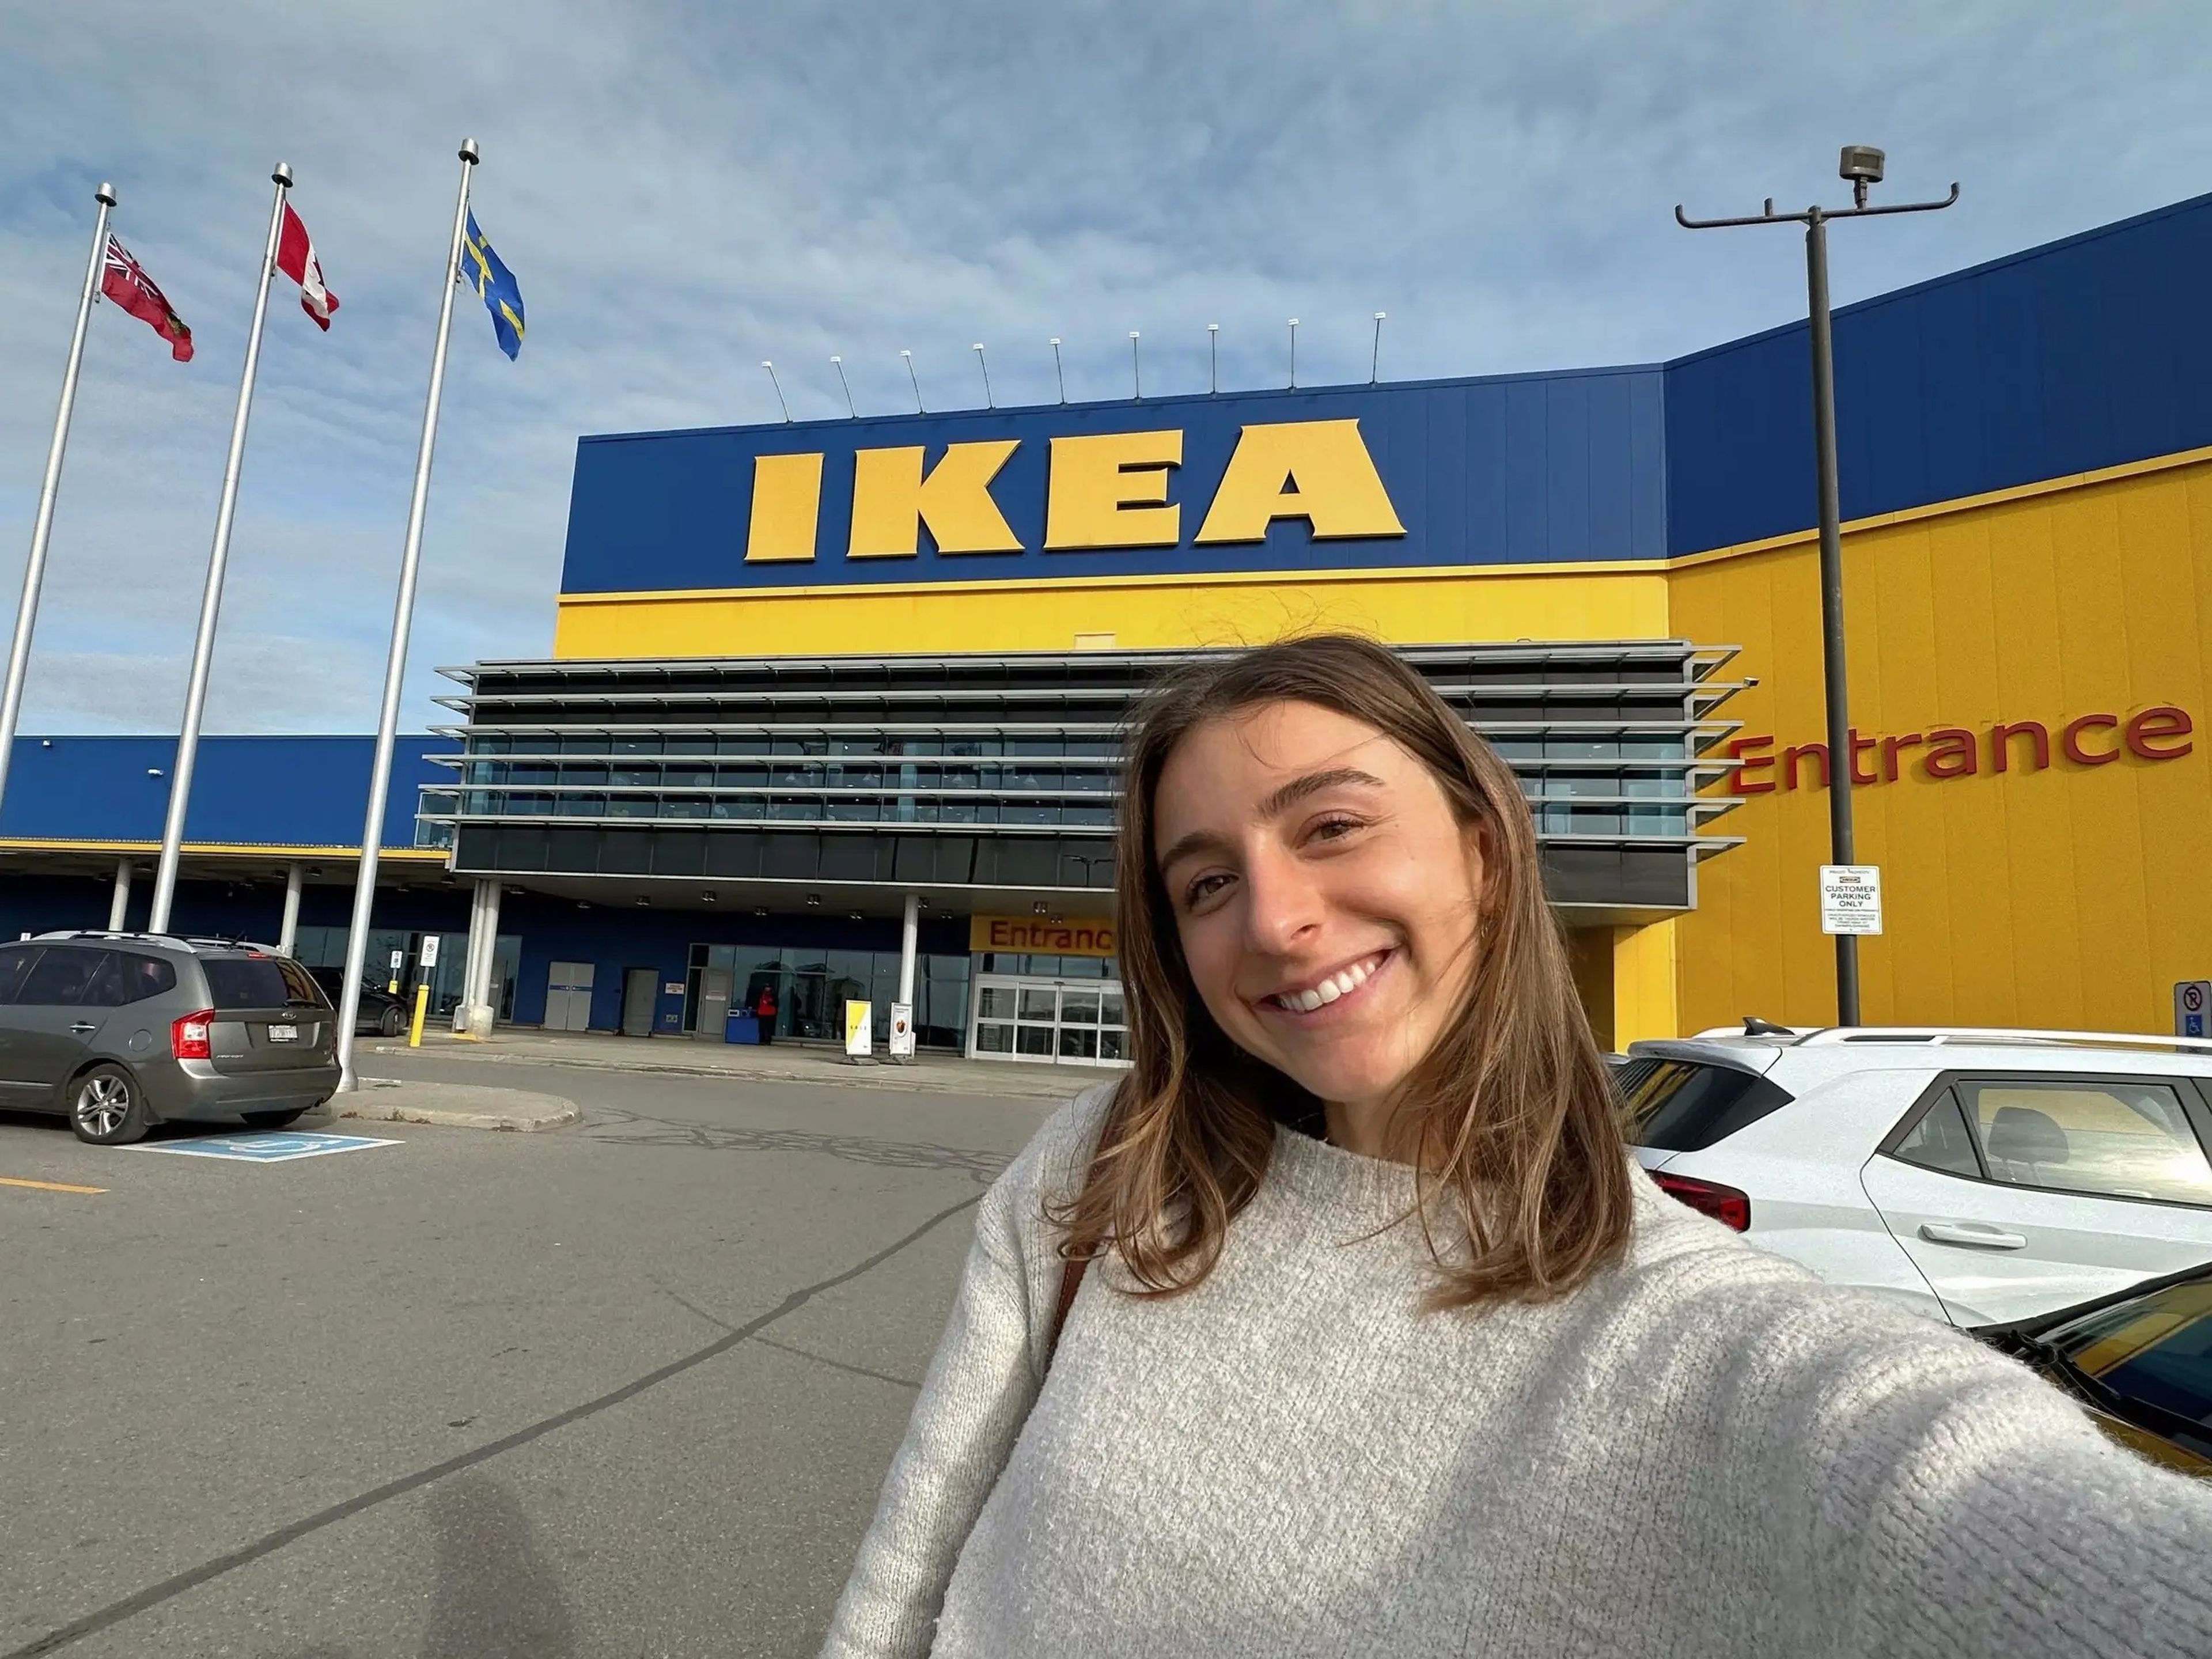 Selfie of the writer smiling and wearing a white sweater in Ikea parking lot in front of the store